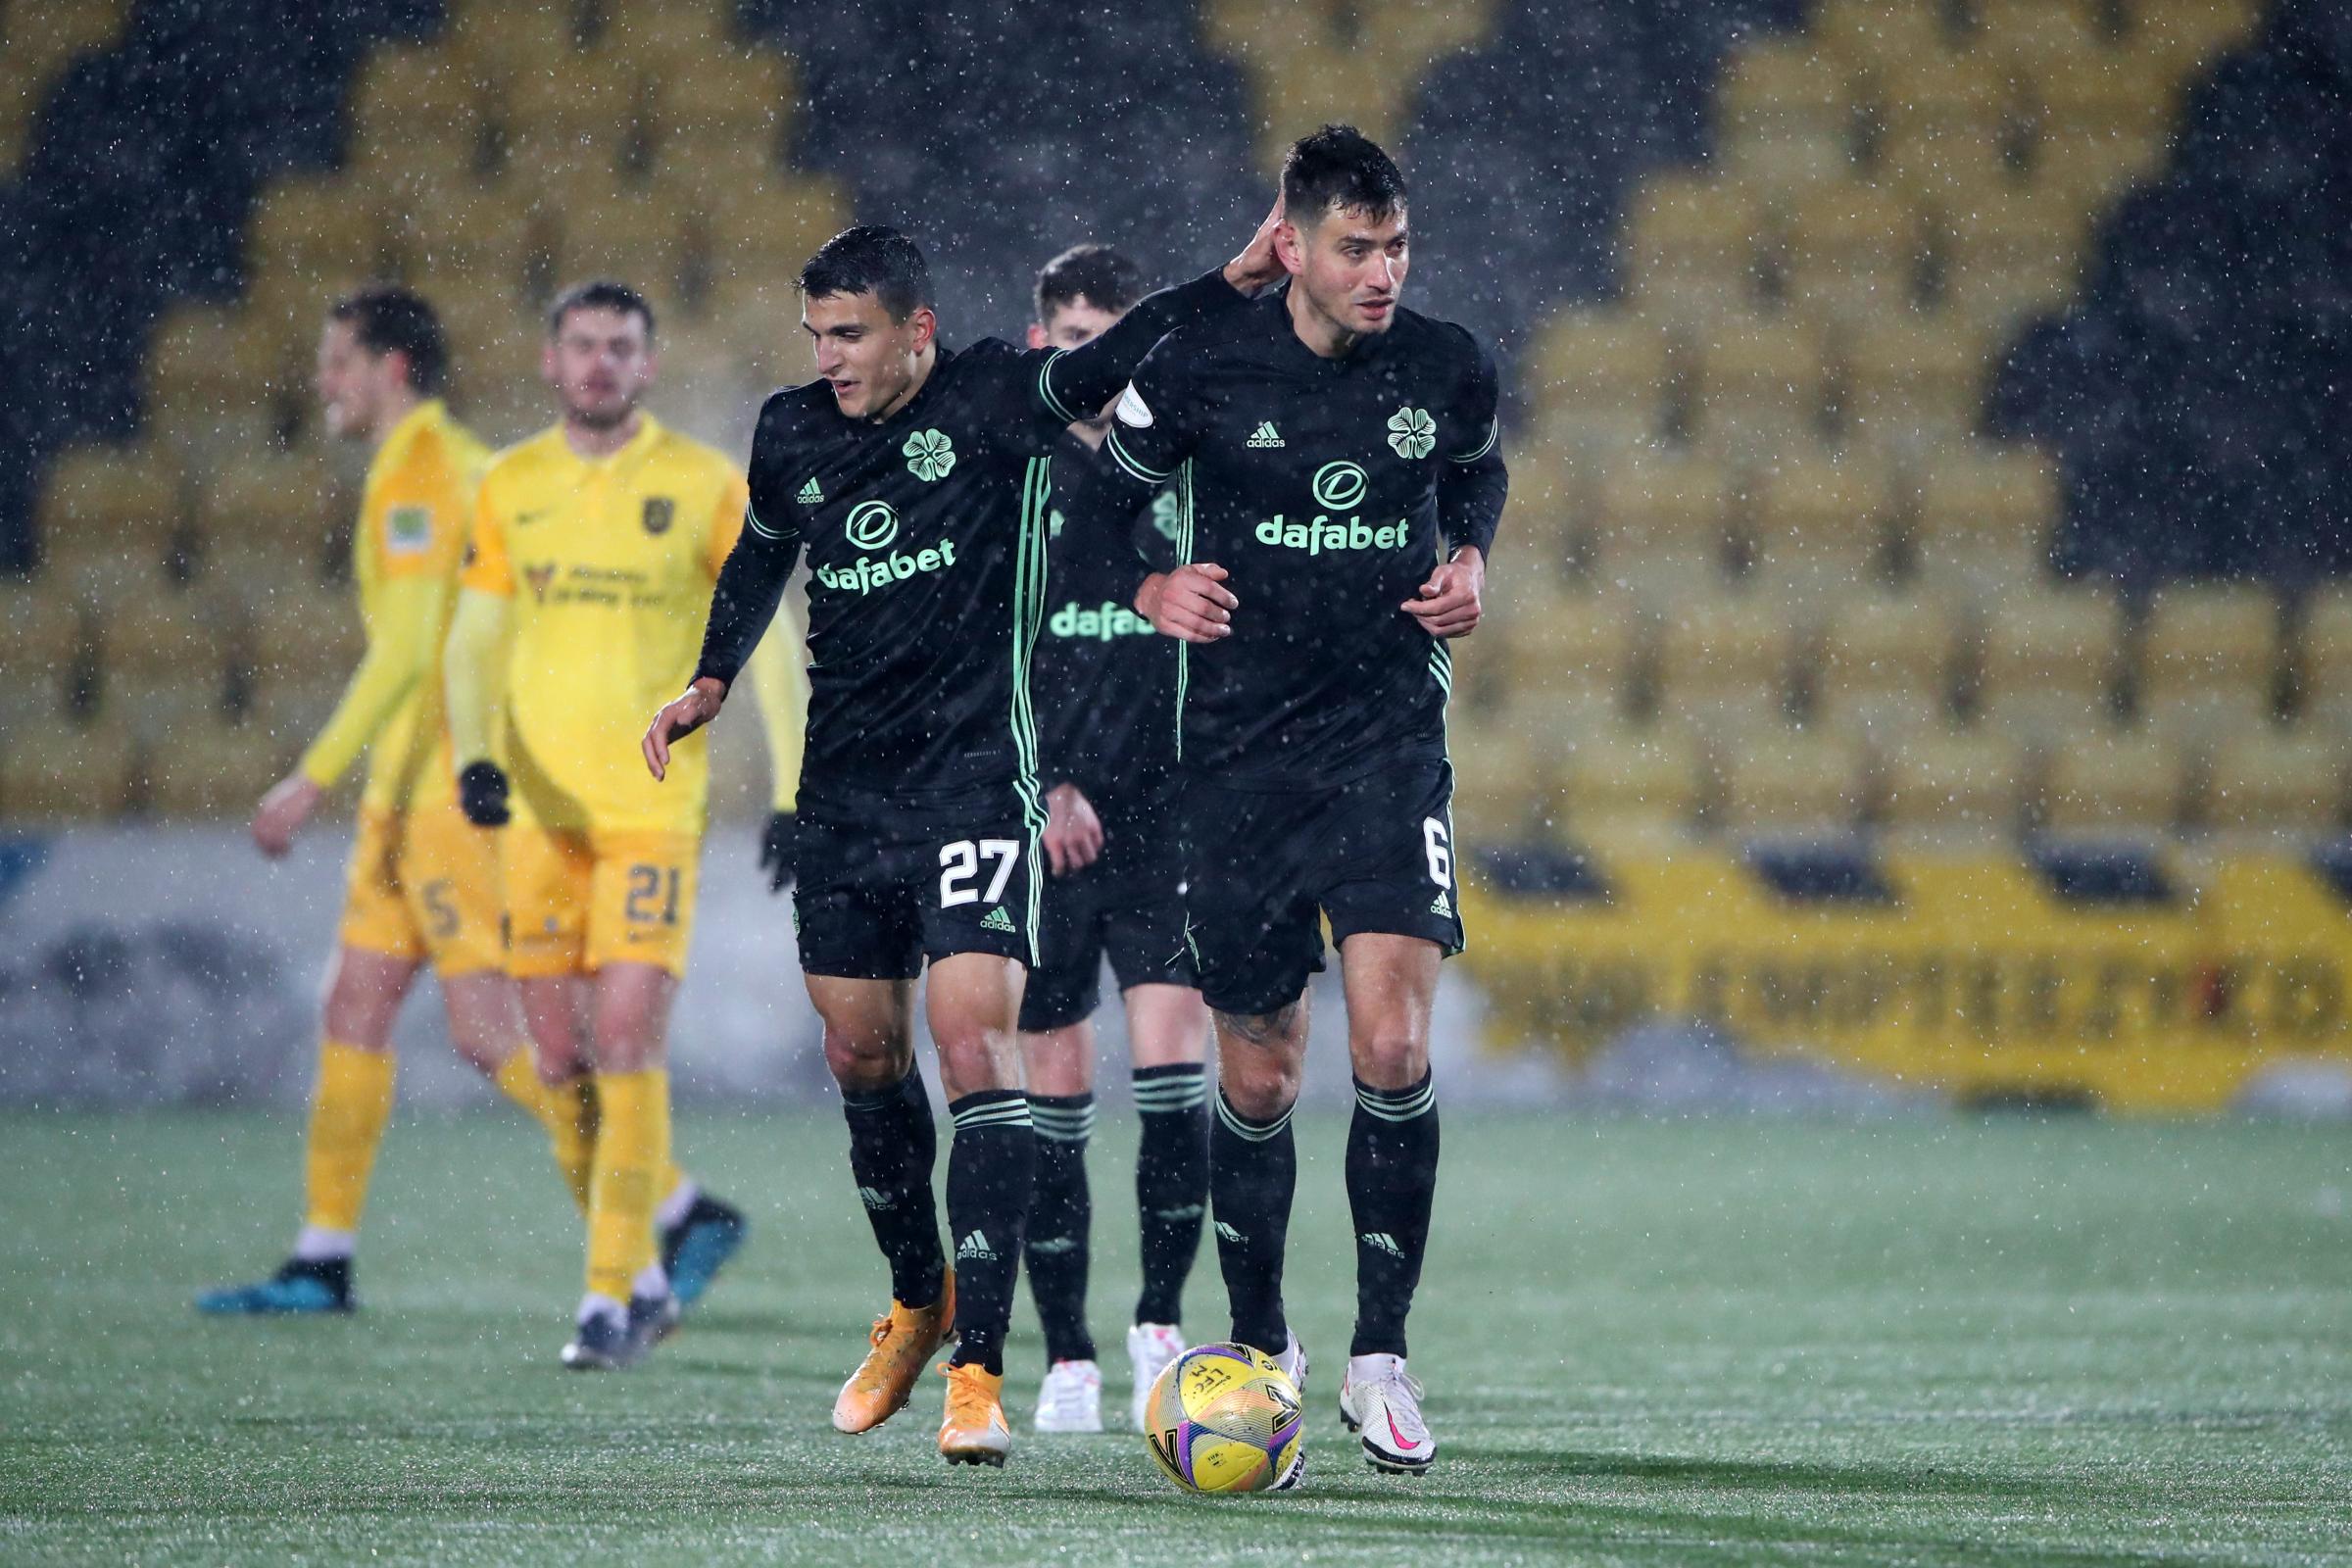 Livingston 2 Celtic 2: How the Celtic players rated as they drop points yet again